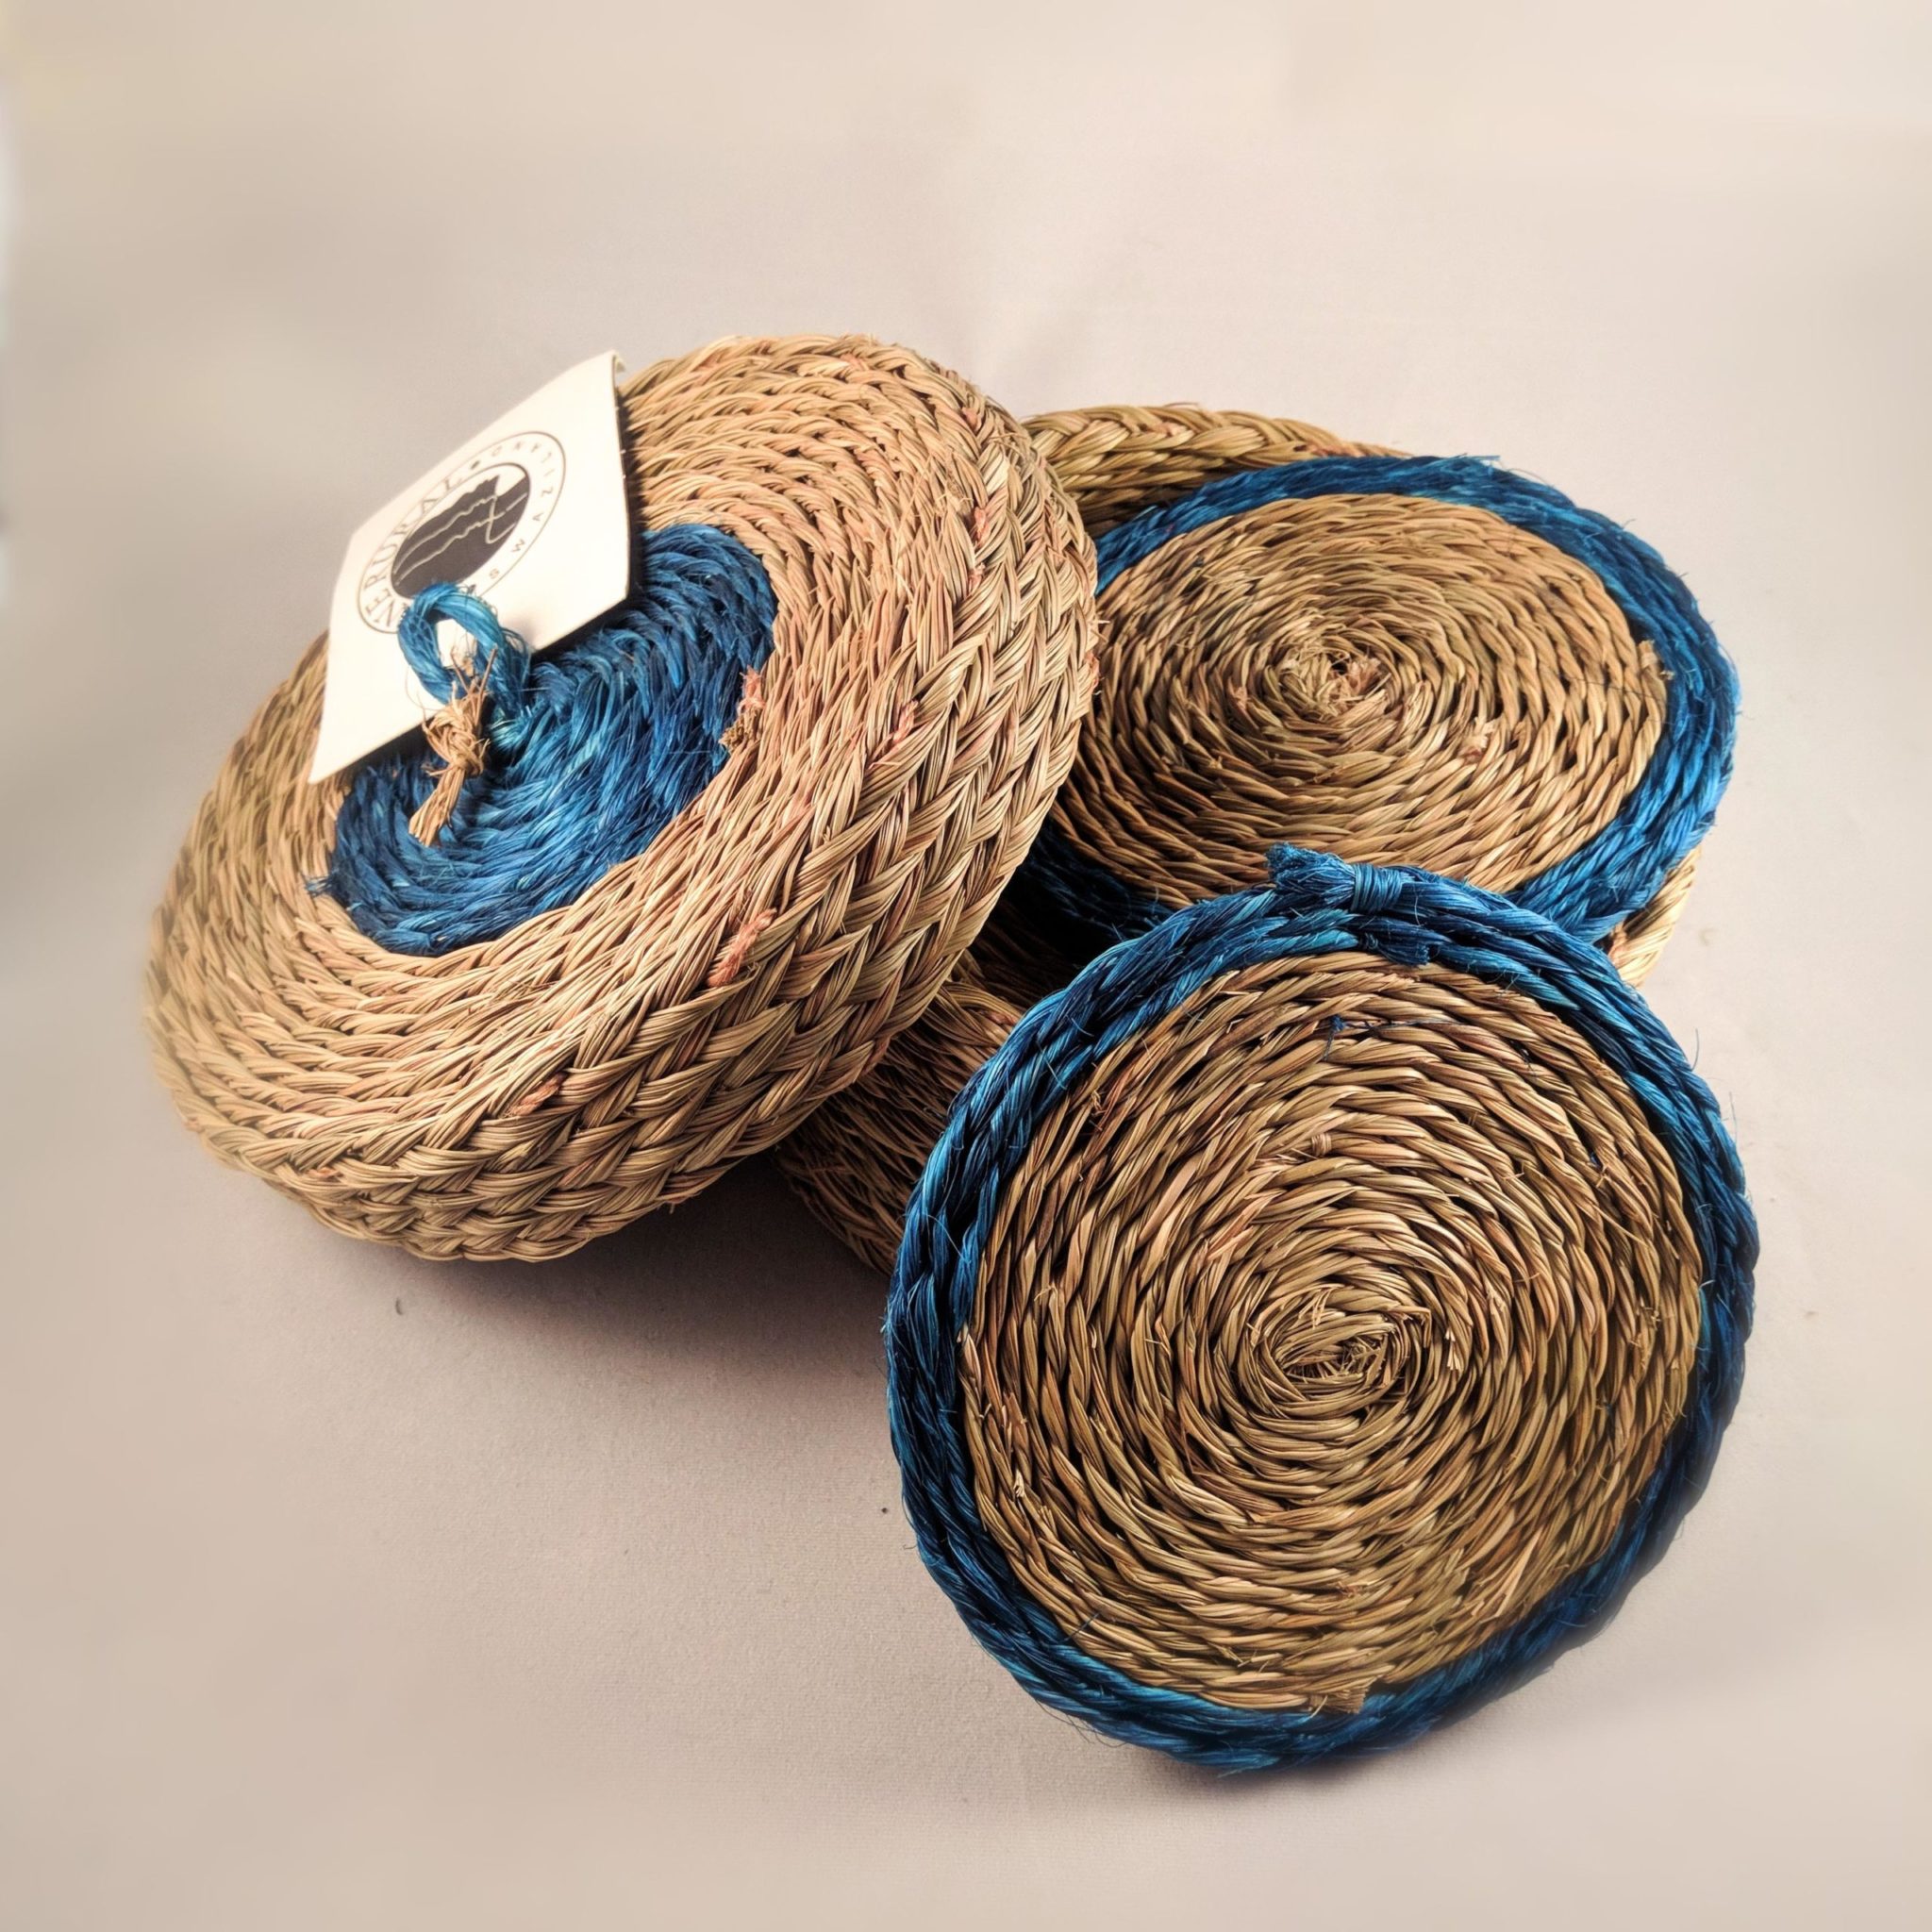 Woven Coasters - 6 Piece Gift Sets - blue trim